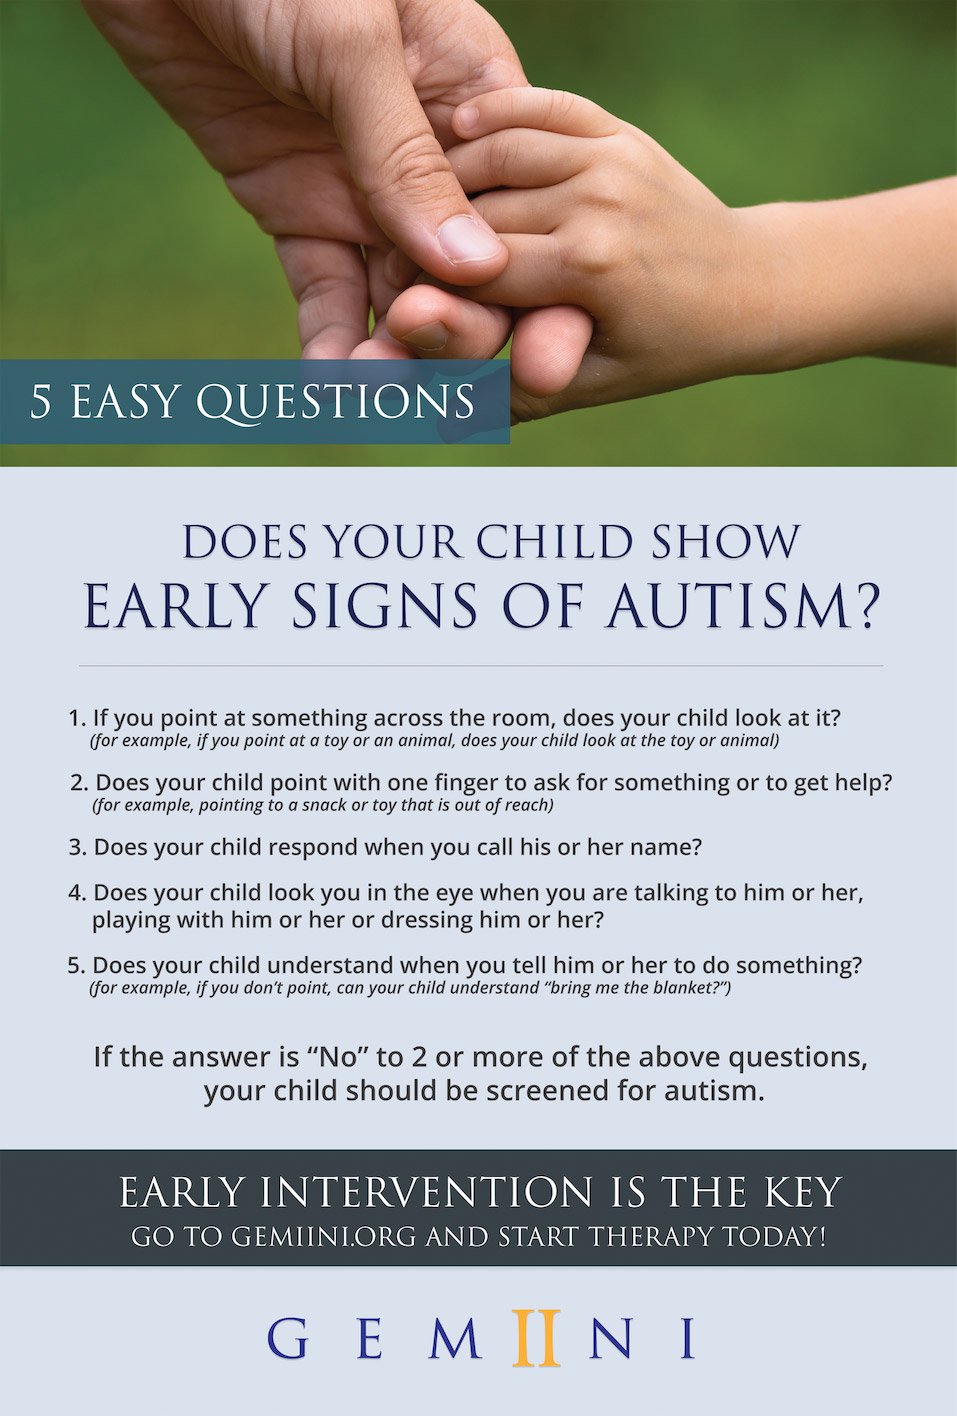 The 5 Easy Questions That Can Help Detect Autism  Gemiini ...